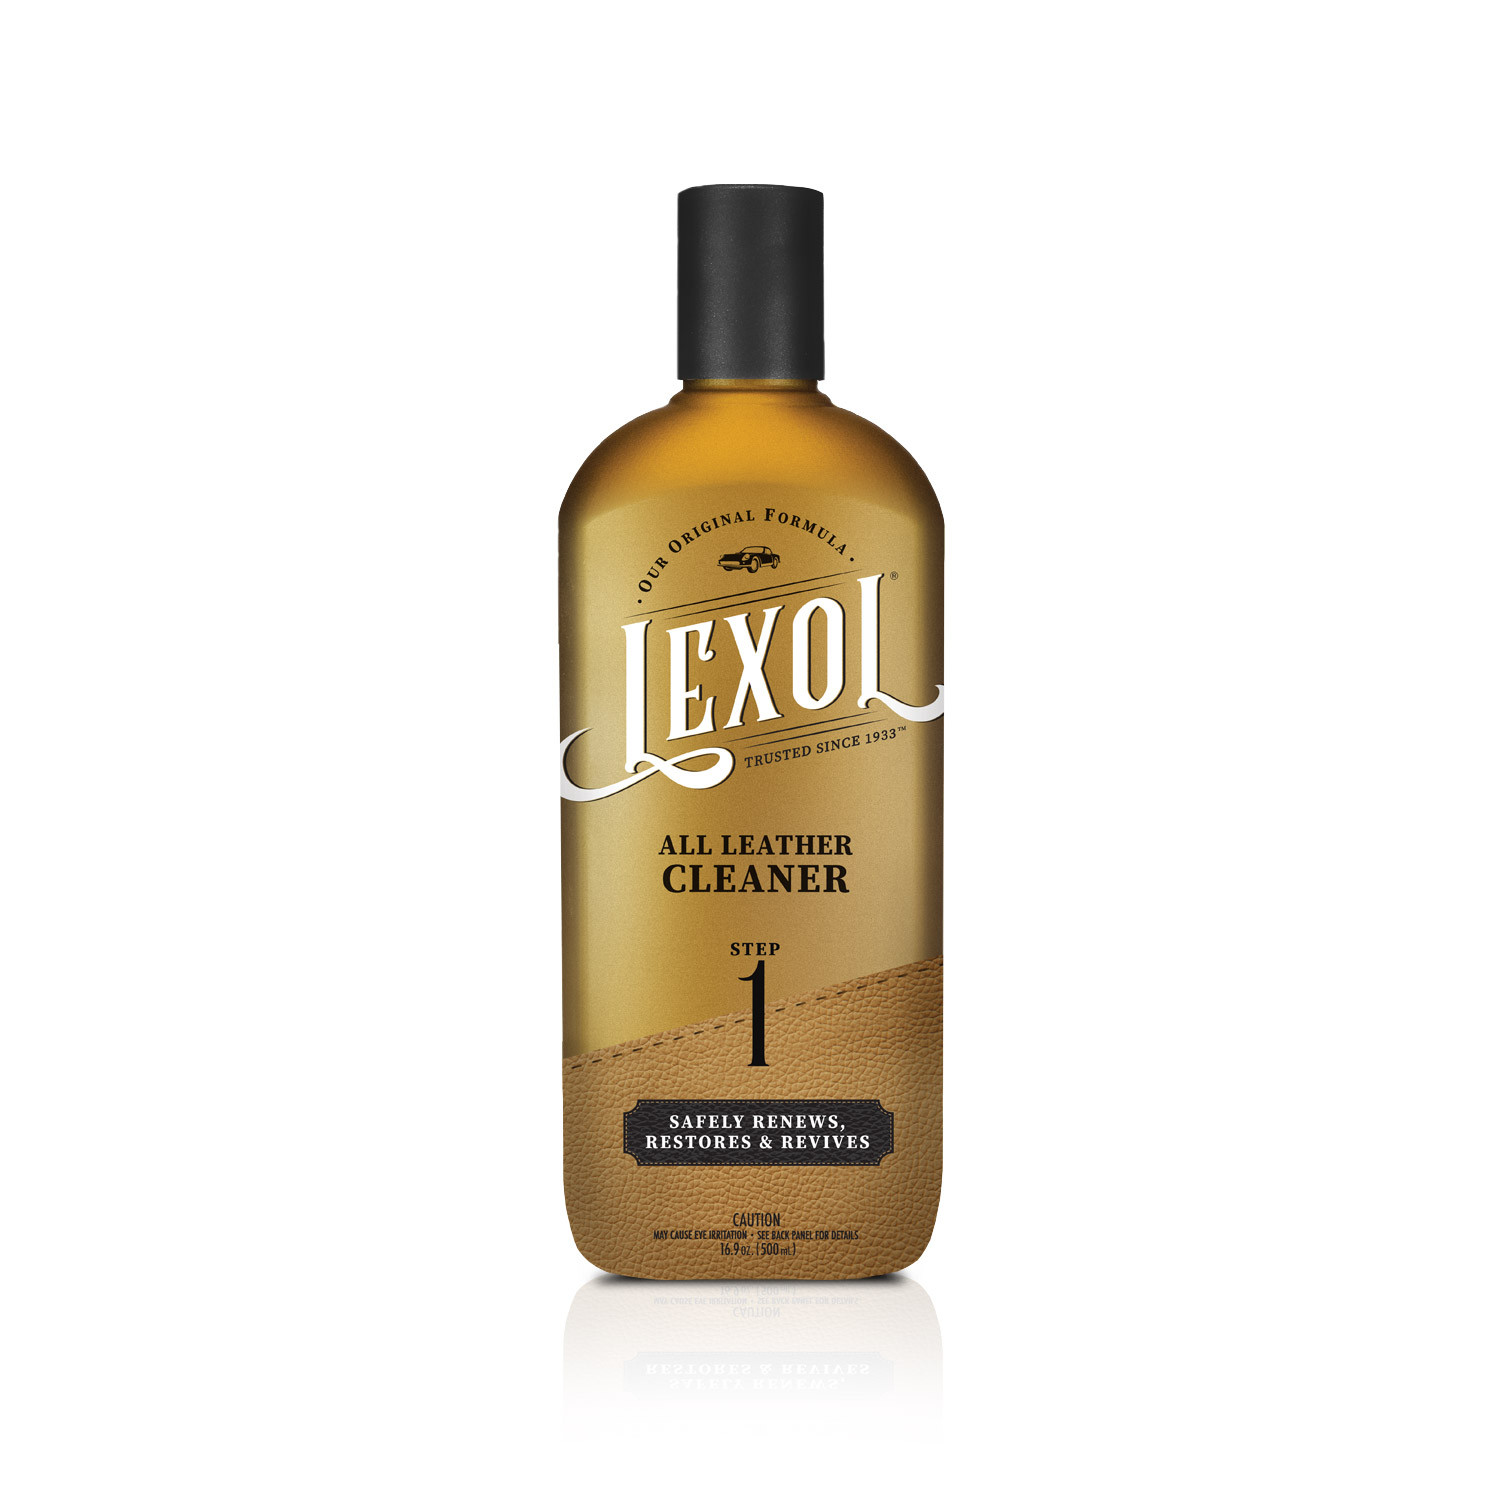 Lexol All Leather Deep Leather Cleaner, bottle - 16.9 OZ - image 1 of 9